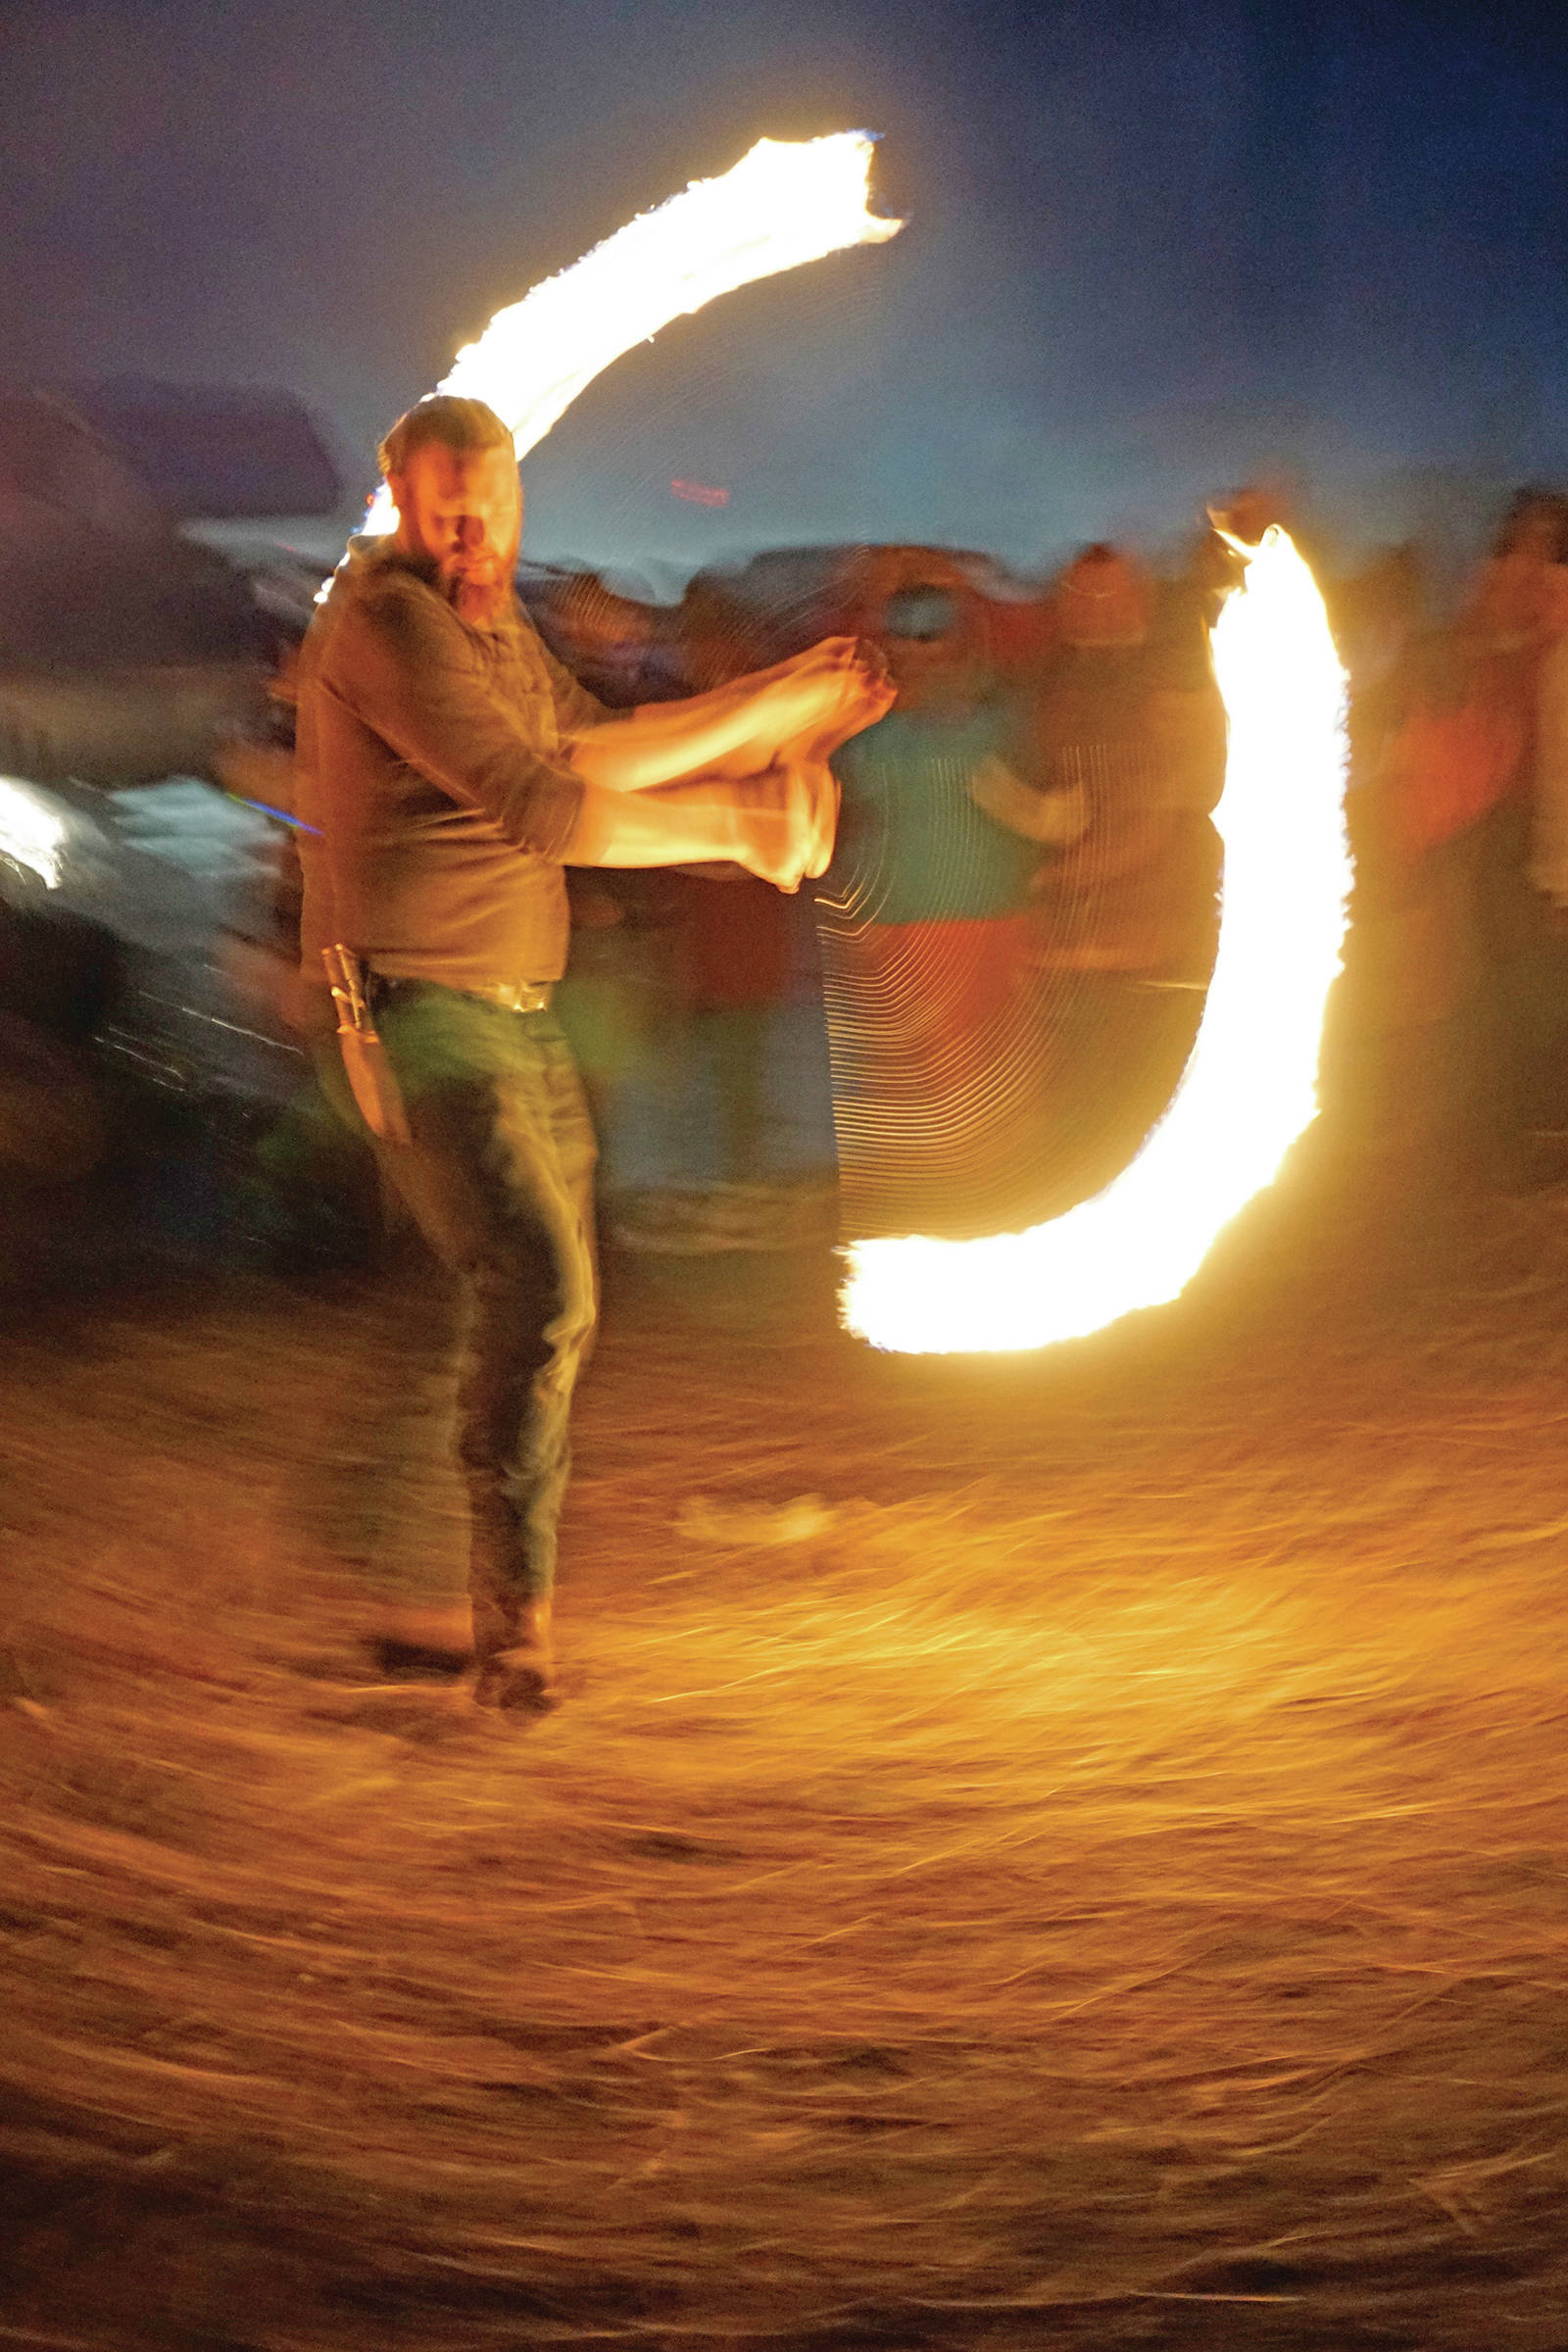 Aaron Stillwell spins fire at “Radiate,” the 16th annual Burning Basket, as it burns down on Sunday night, Sept. 15, 2019, at Mariner Park on the Homer Spit in Homer, Alaska. (Photo by Michael Armstrong/Homer News)